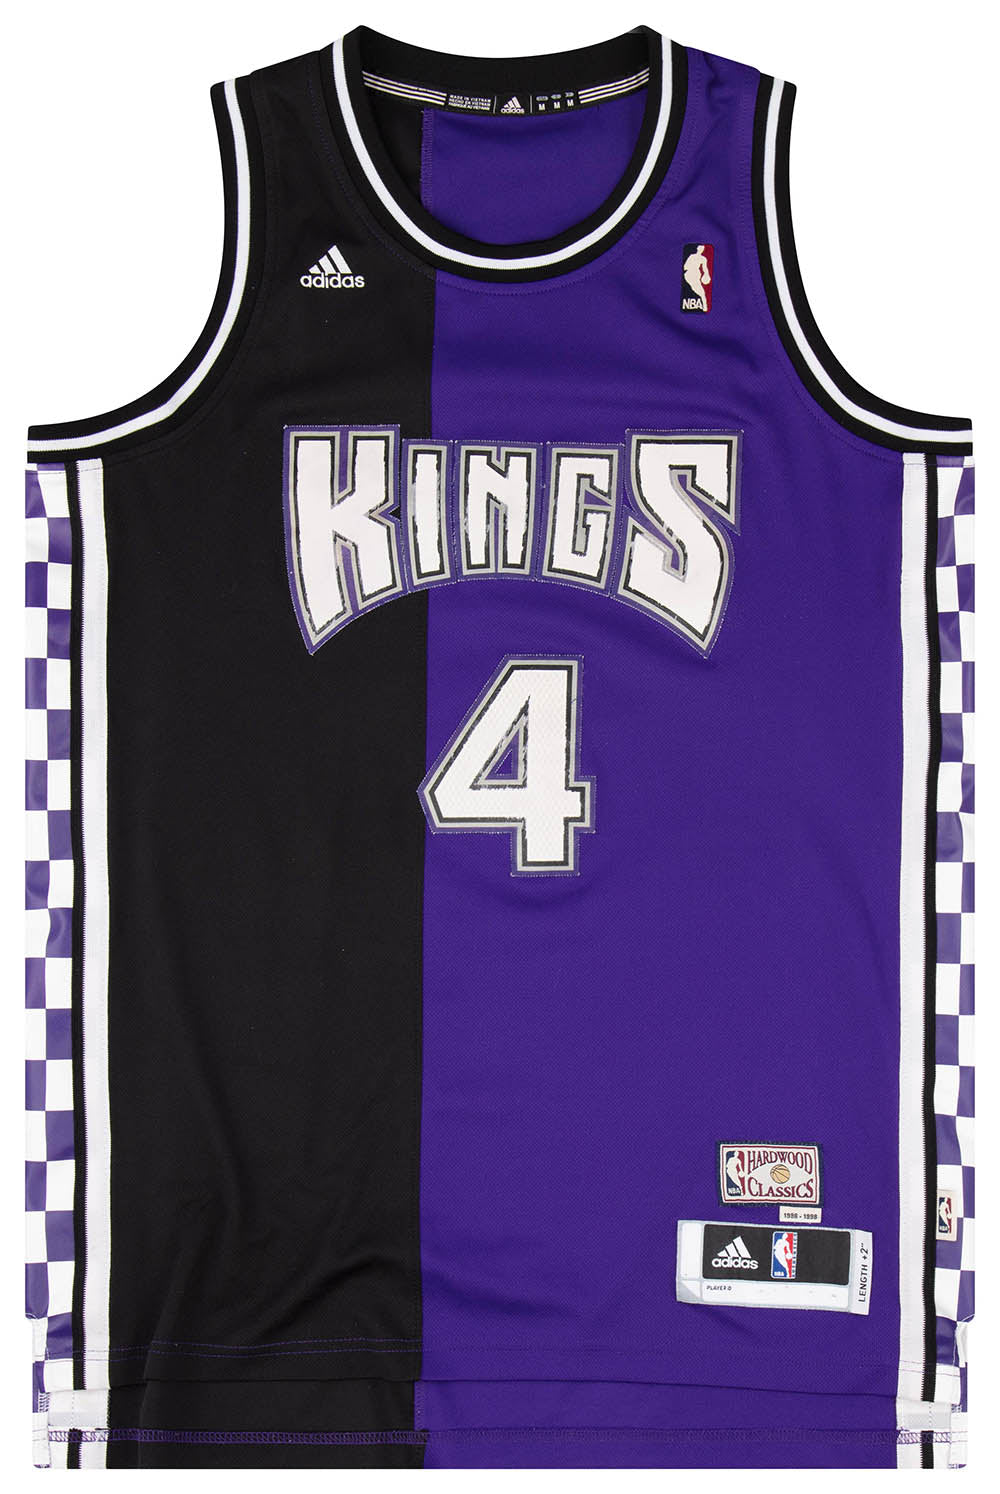 White Chocolate in Kings purple 😈 #Kings #authentic #nbaplayoffs